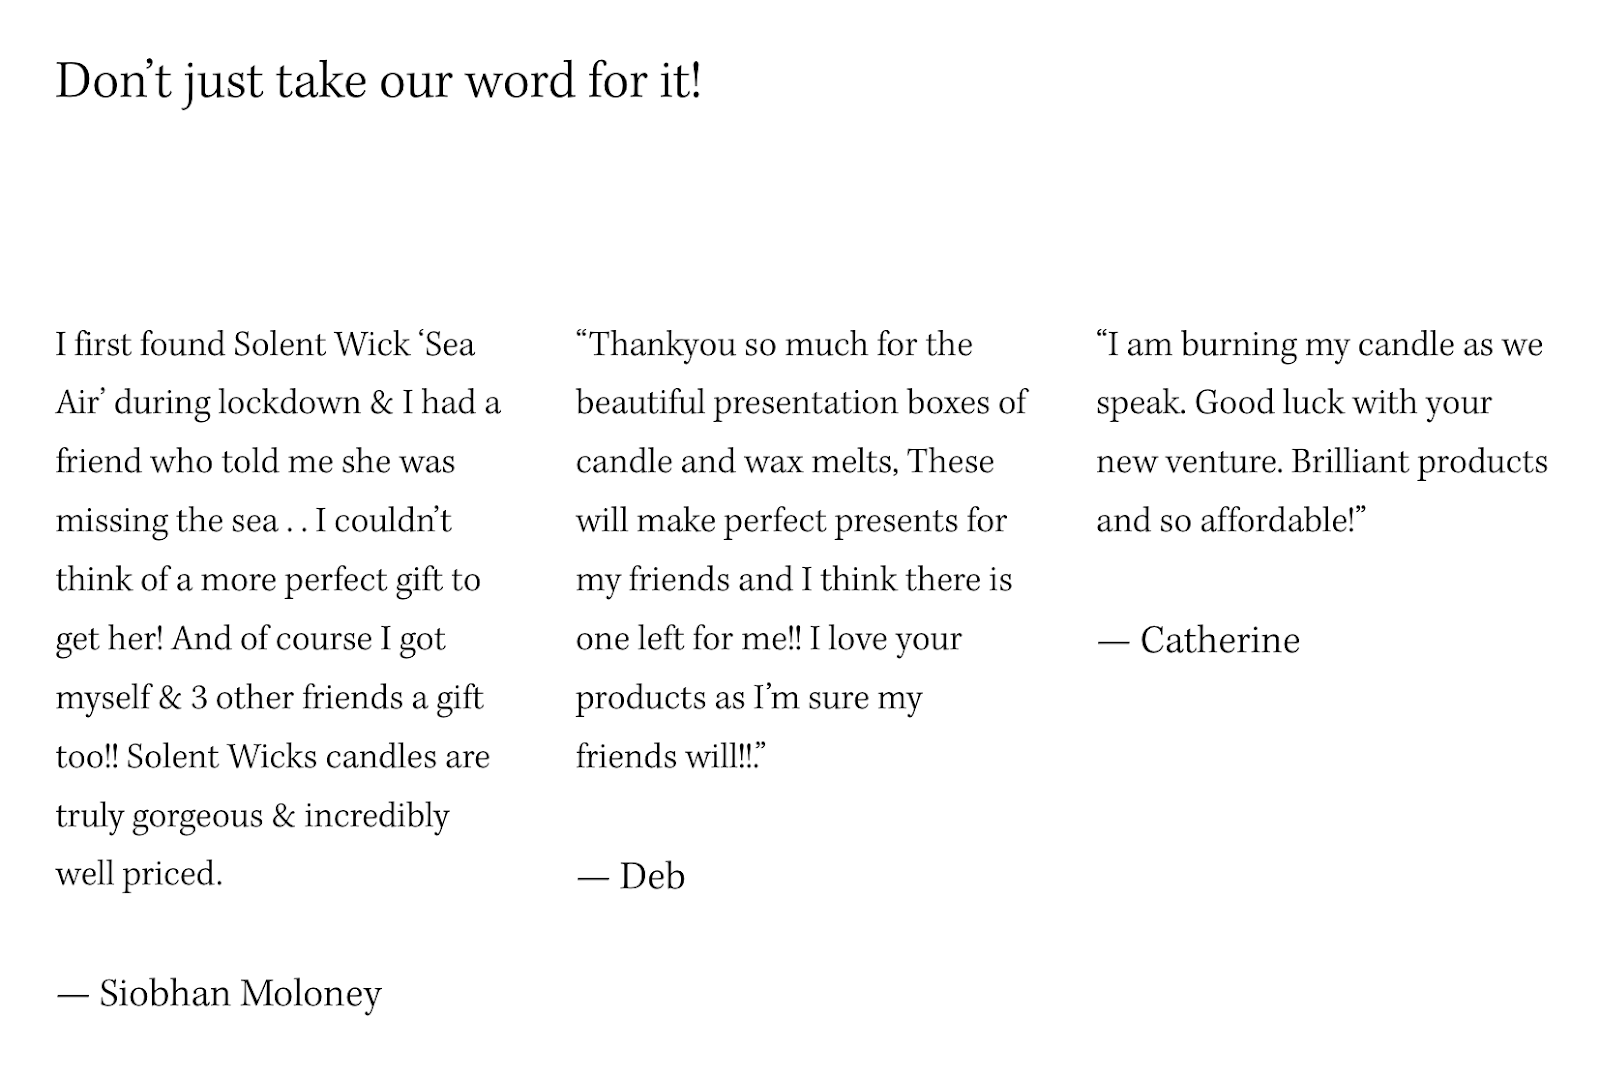 an example of a page from U.K. candle maker Solent Wick titled "Don’t just take our word for it!"